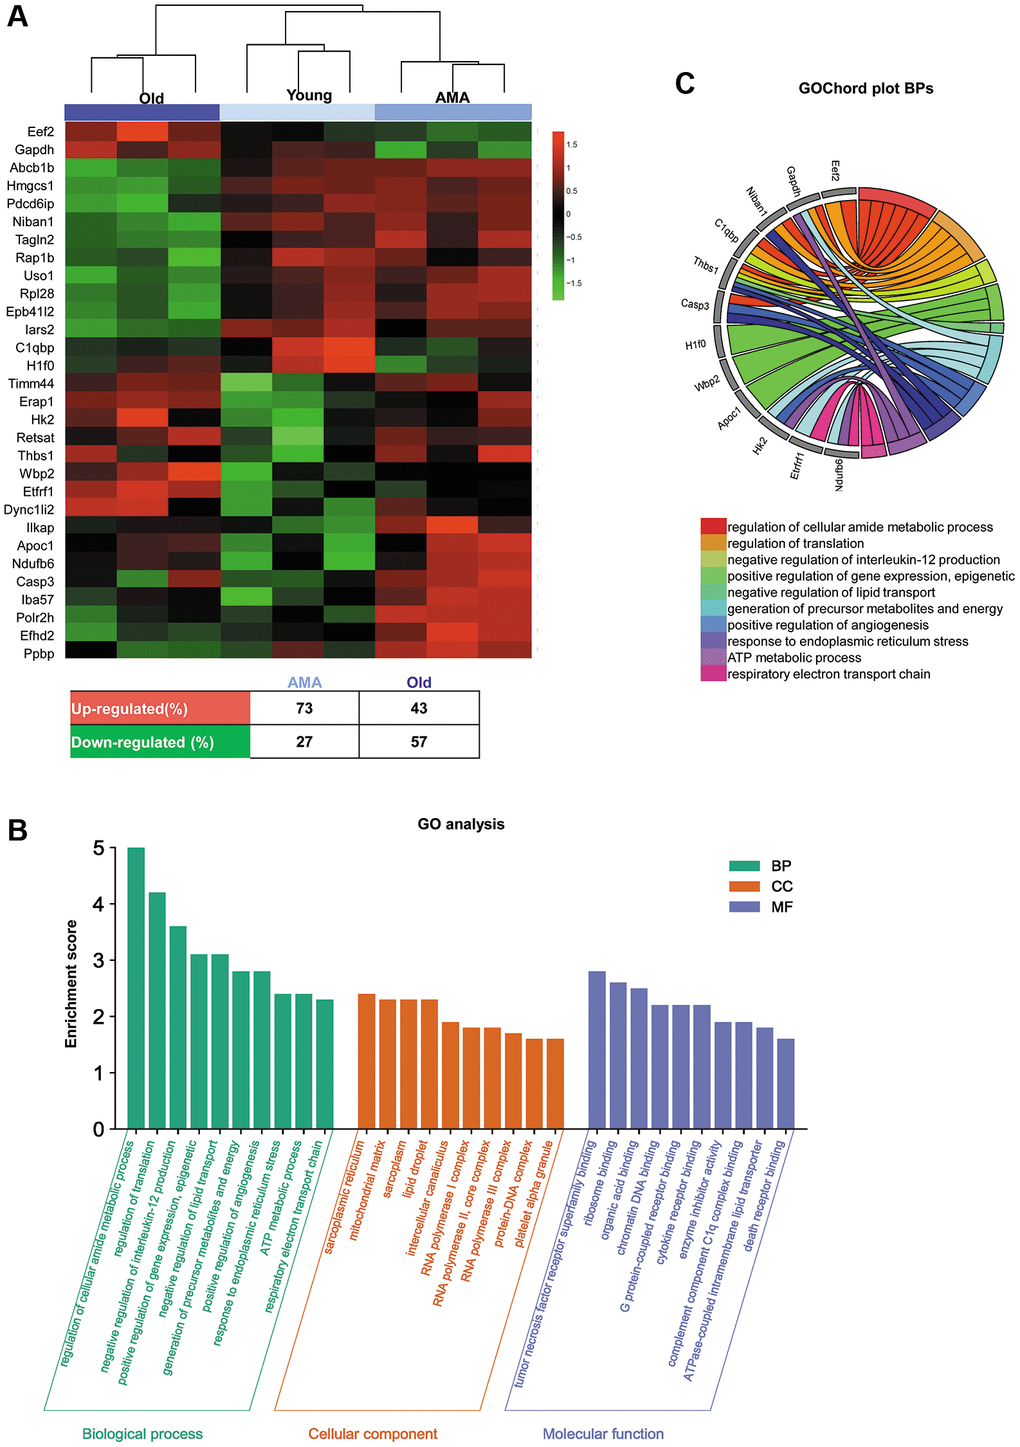 Ovarian proteomic profiling of a NOD/SCID mouse model for physiological human aging. (A) Hierarchical clustering based on the mean expression of the 30 significantly differentially expressed proteins (DEPs) between young, advanced maternal age (AMA), and old mice identified by ElasticNET regression analysis. The table beneath the heatmap shows an overview of the DEPs from the AMA and old mice, with respect to the young mice. (B) Significantly enriched Gene Ontology (GO) biological processes, cellular components, and molecular function (FDR C) GOChord plot of the top ten biological processes for young, AMA, and old mice, showing the relationship between pathways and the most relevant genes between them.